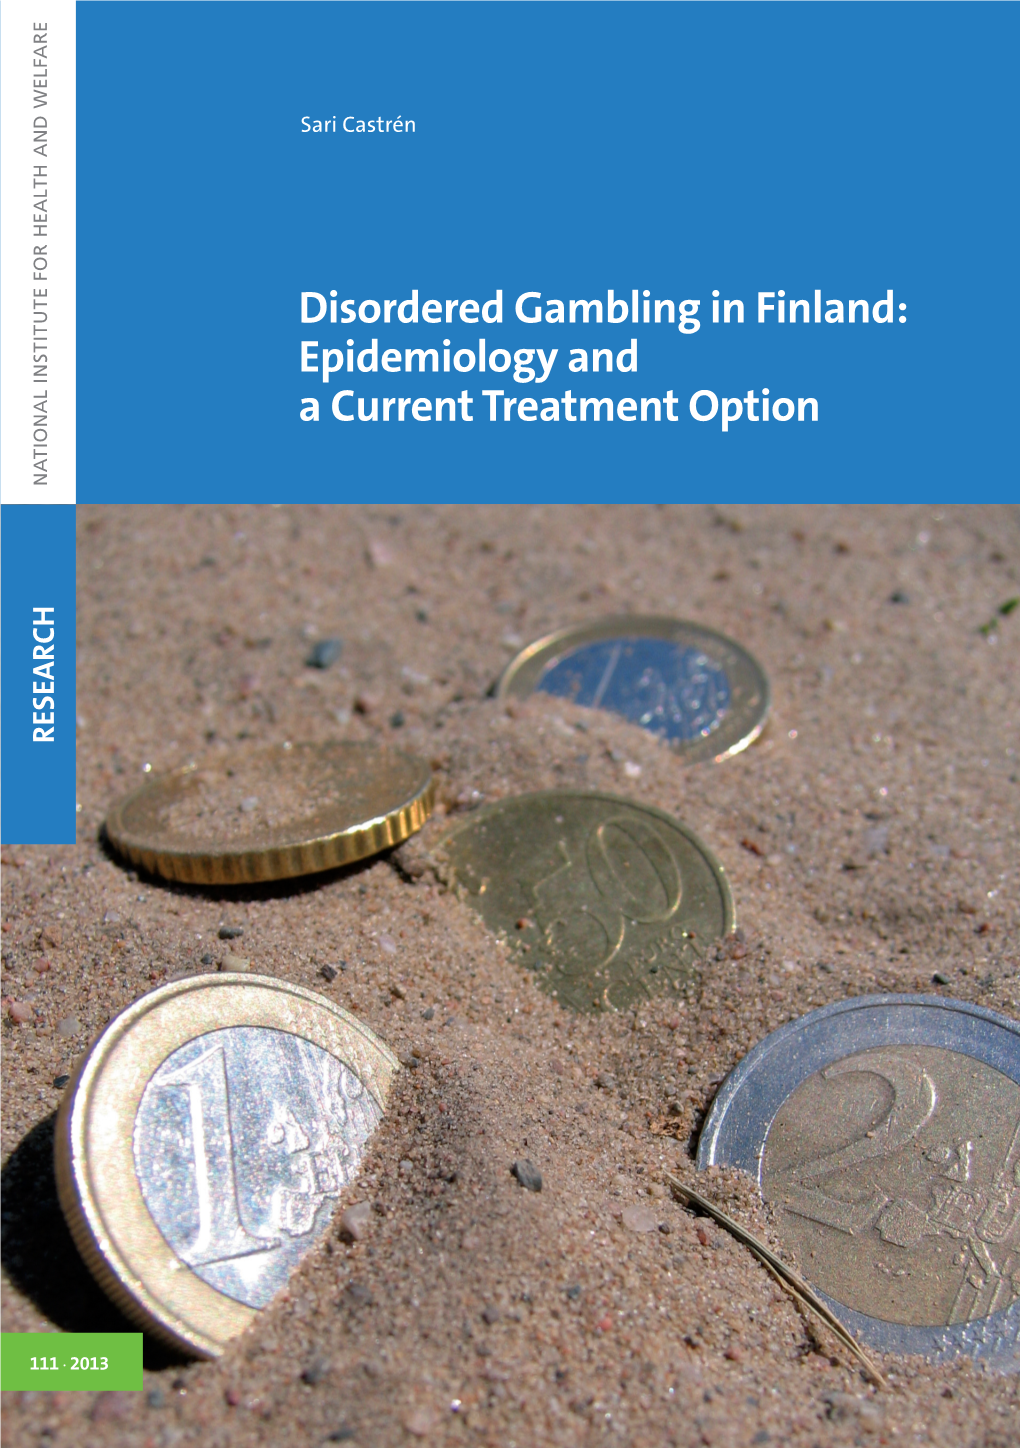 Disordered Gambling in Finland: Gambling Disordered Epidemiology and Option Treatment a Current